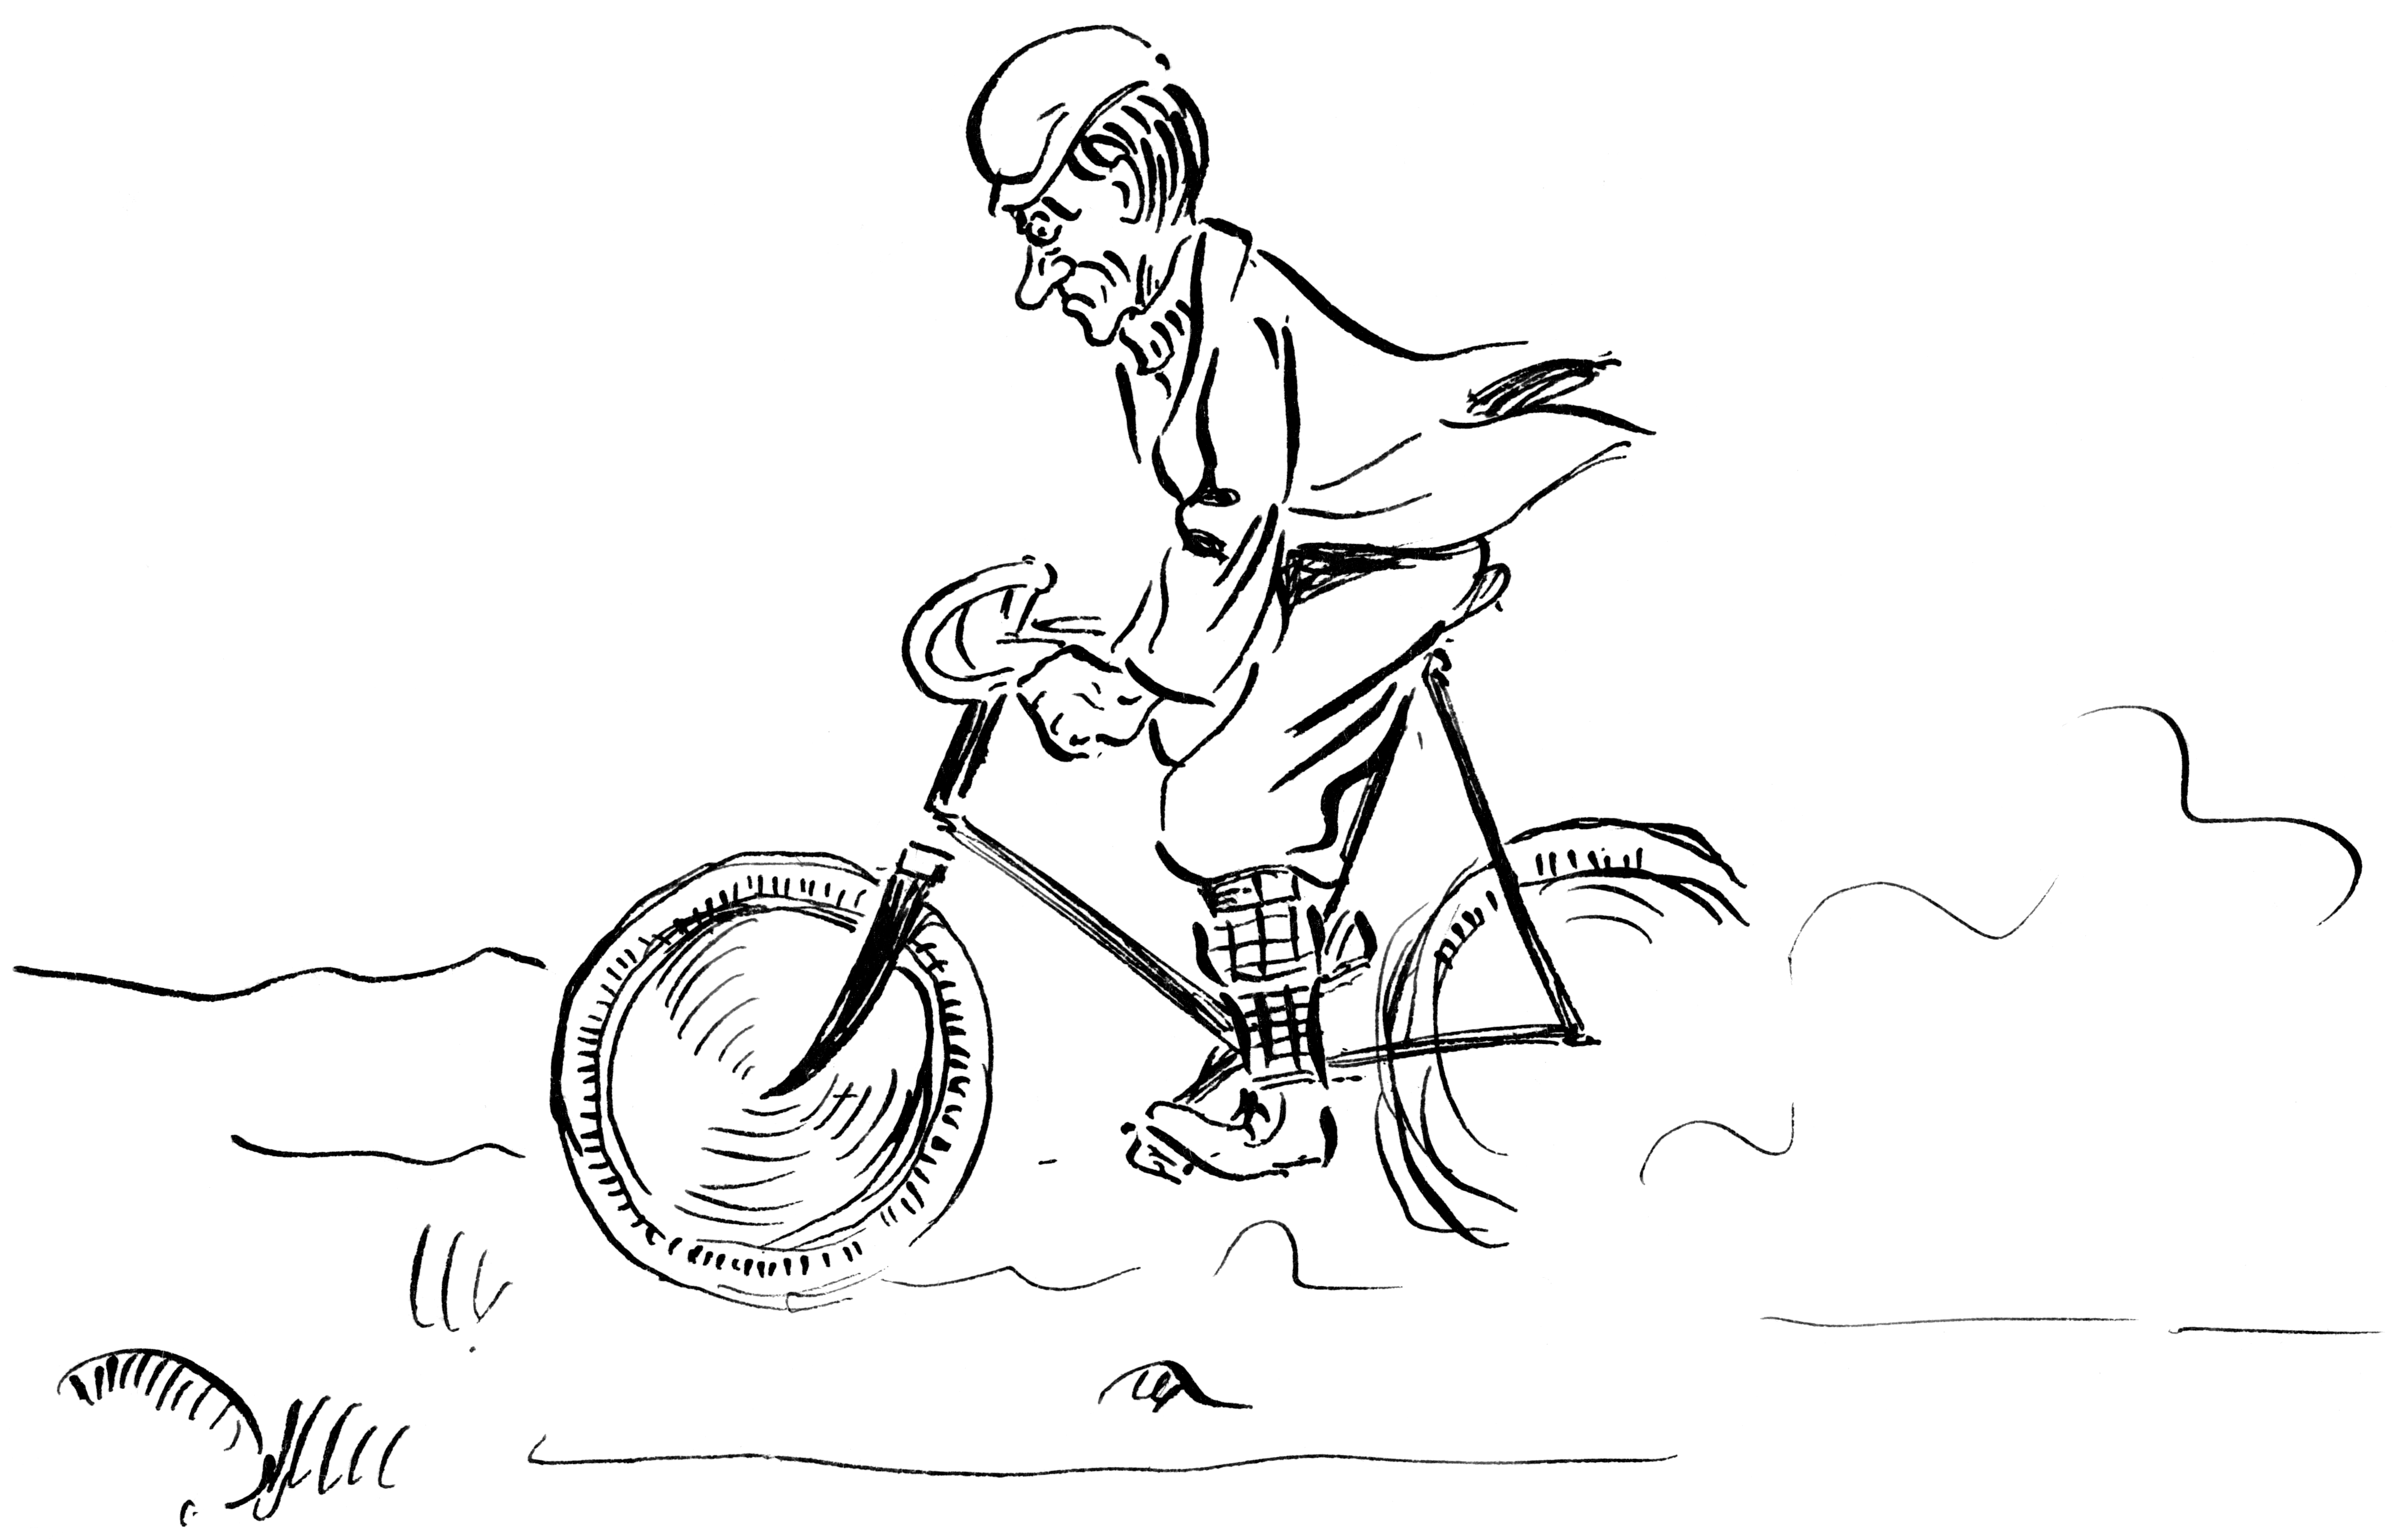 A graphic of a man riding a bicycle wearing a hat and with his clothes blowing in the wind. 